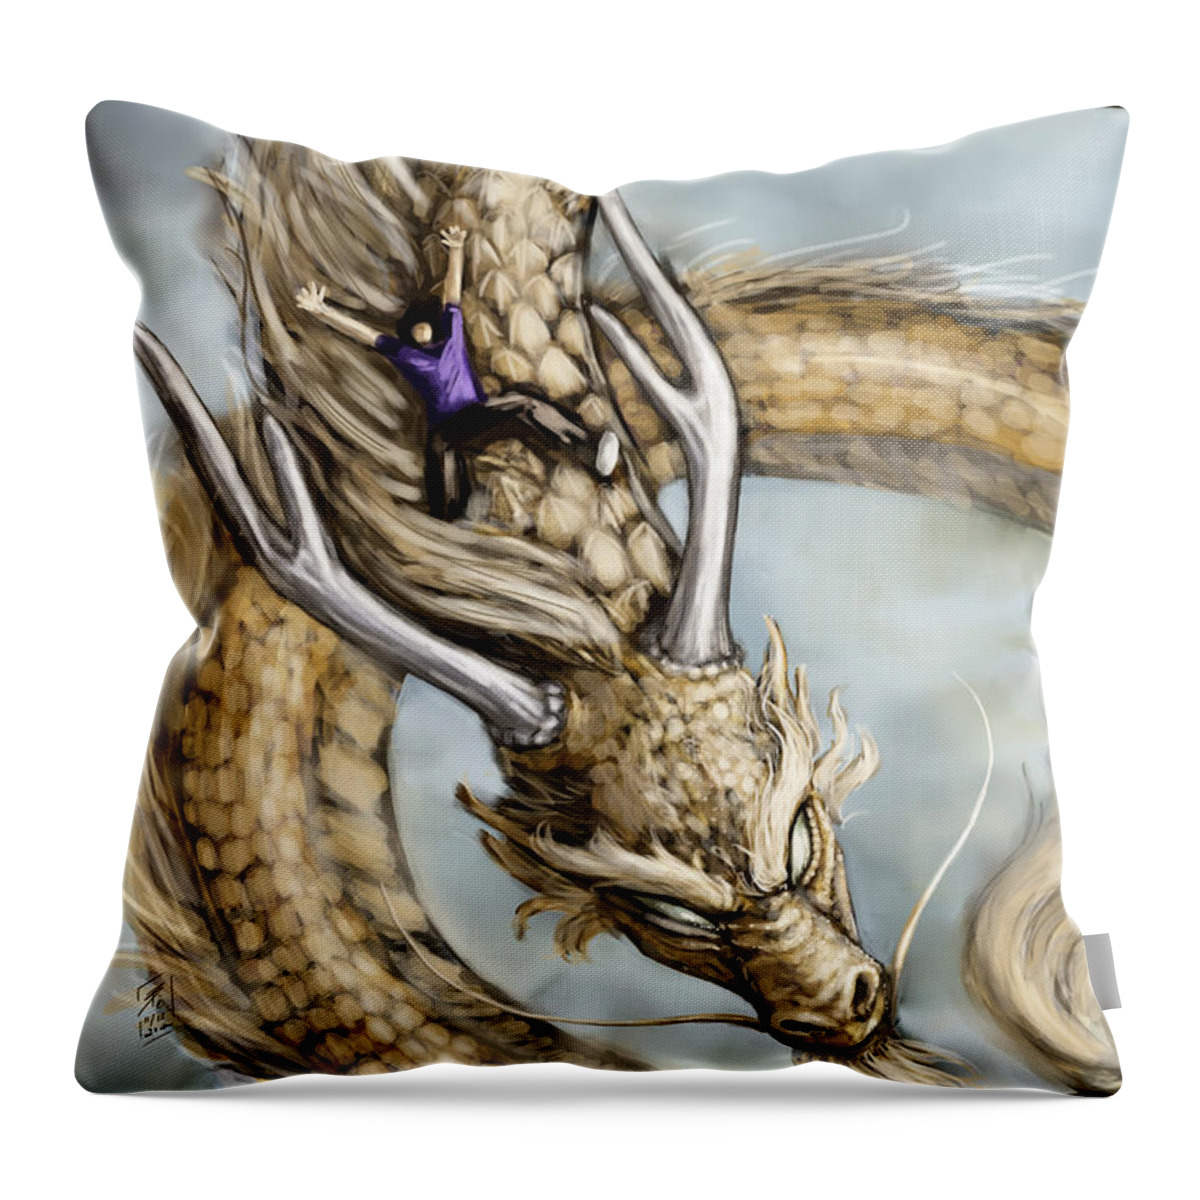 Dragon Throw Pillow featuring the digital art The Day I Could Fly by Brandy Woods